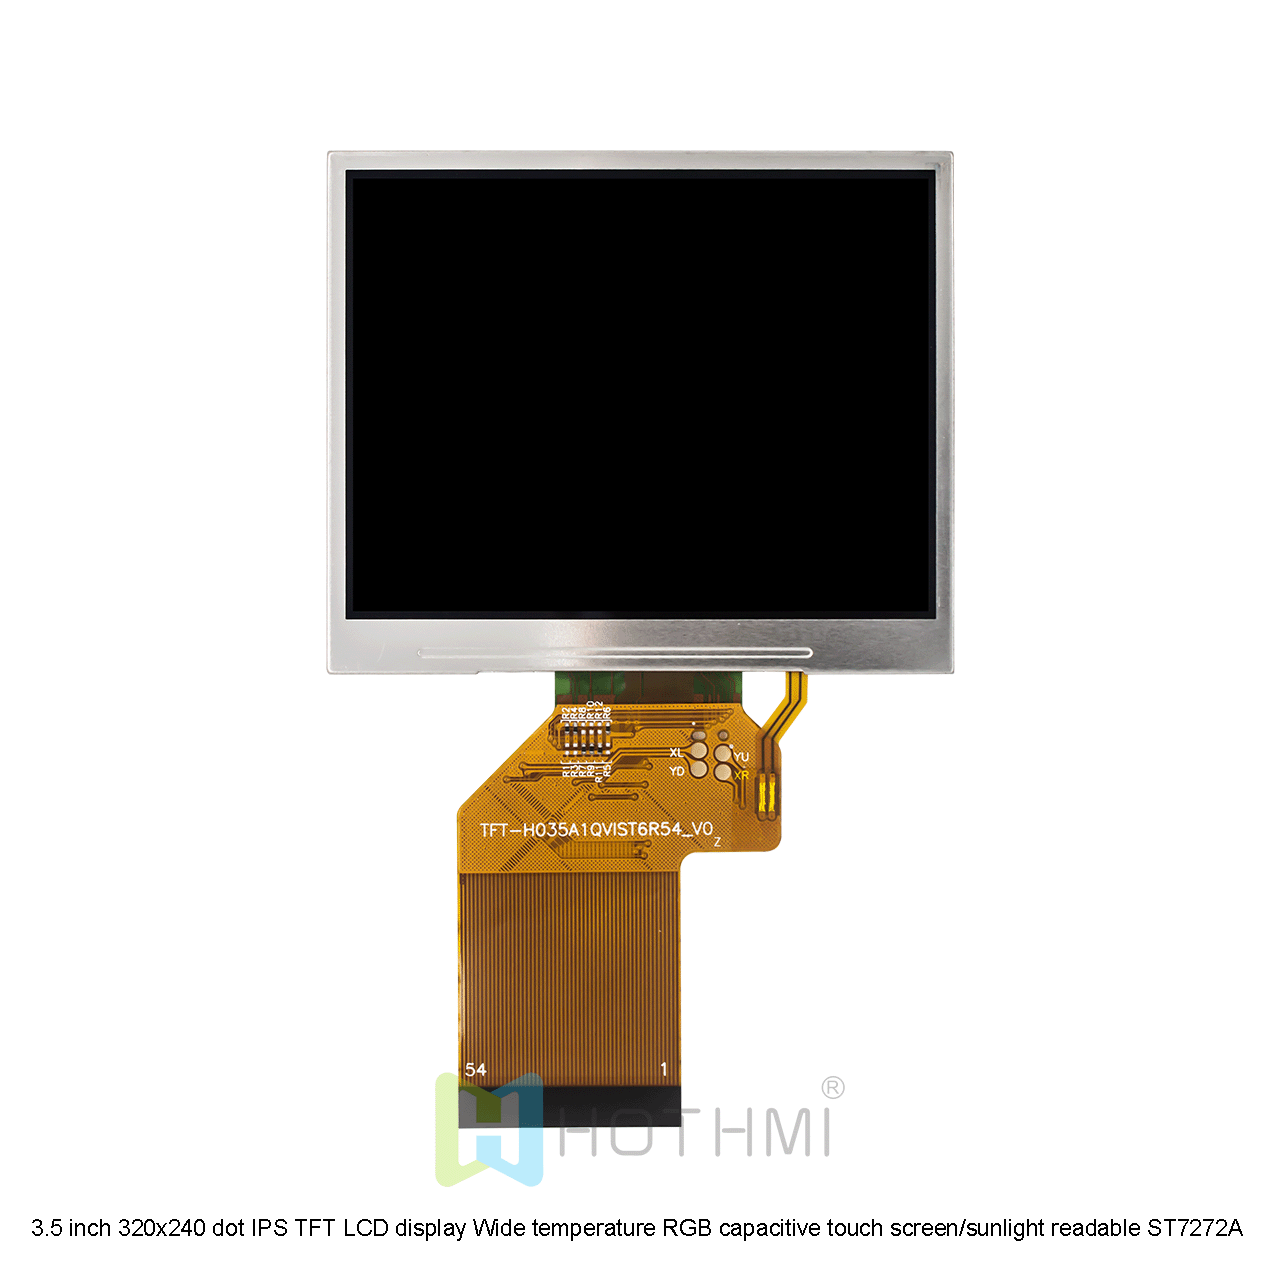 3.5 inch 320x240 dot IPS TFT LCD display Wide temperature RGB Optional capacitive touch screen / sunlight readable ST7272A